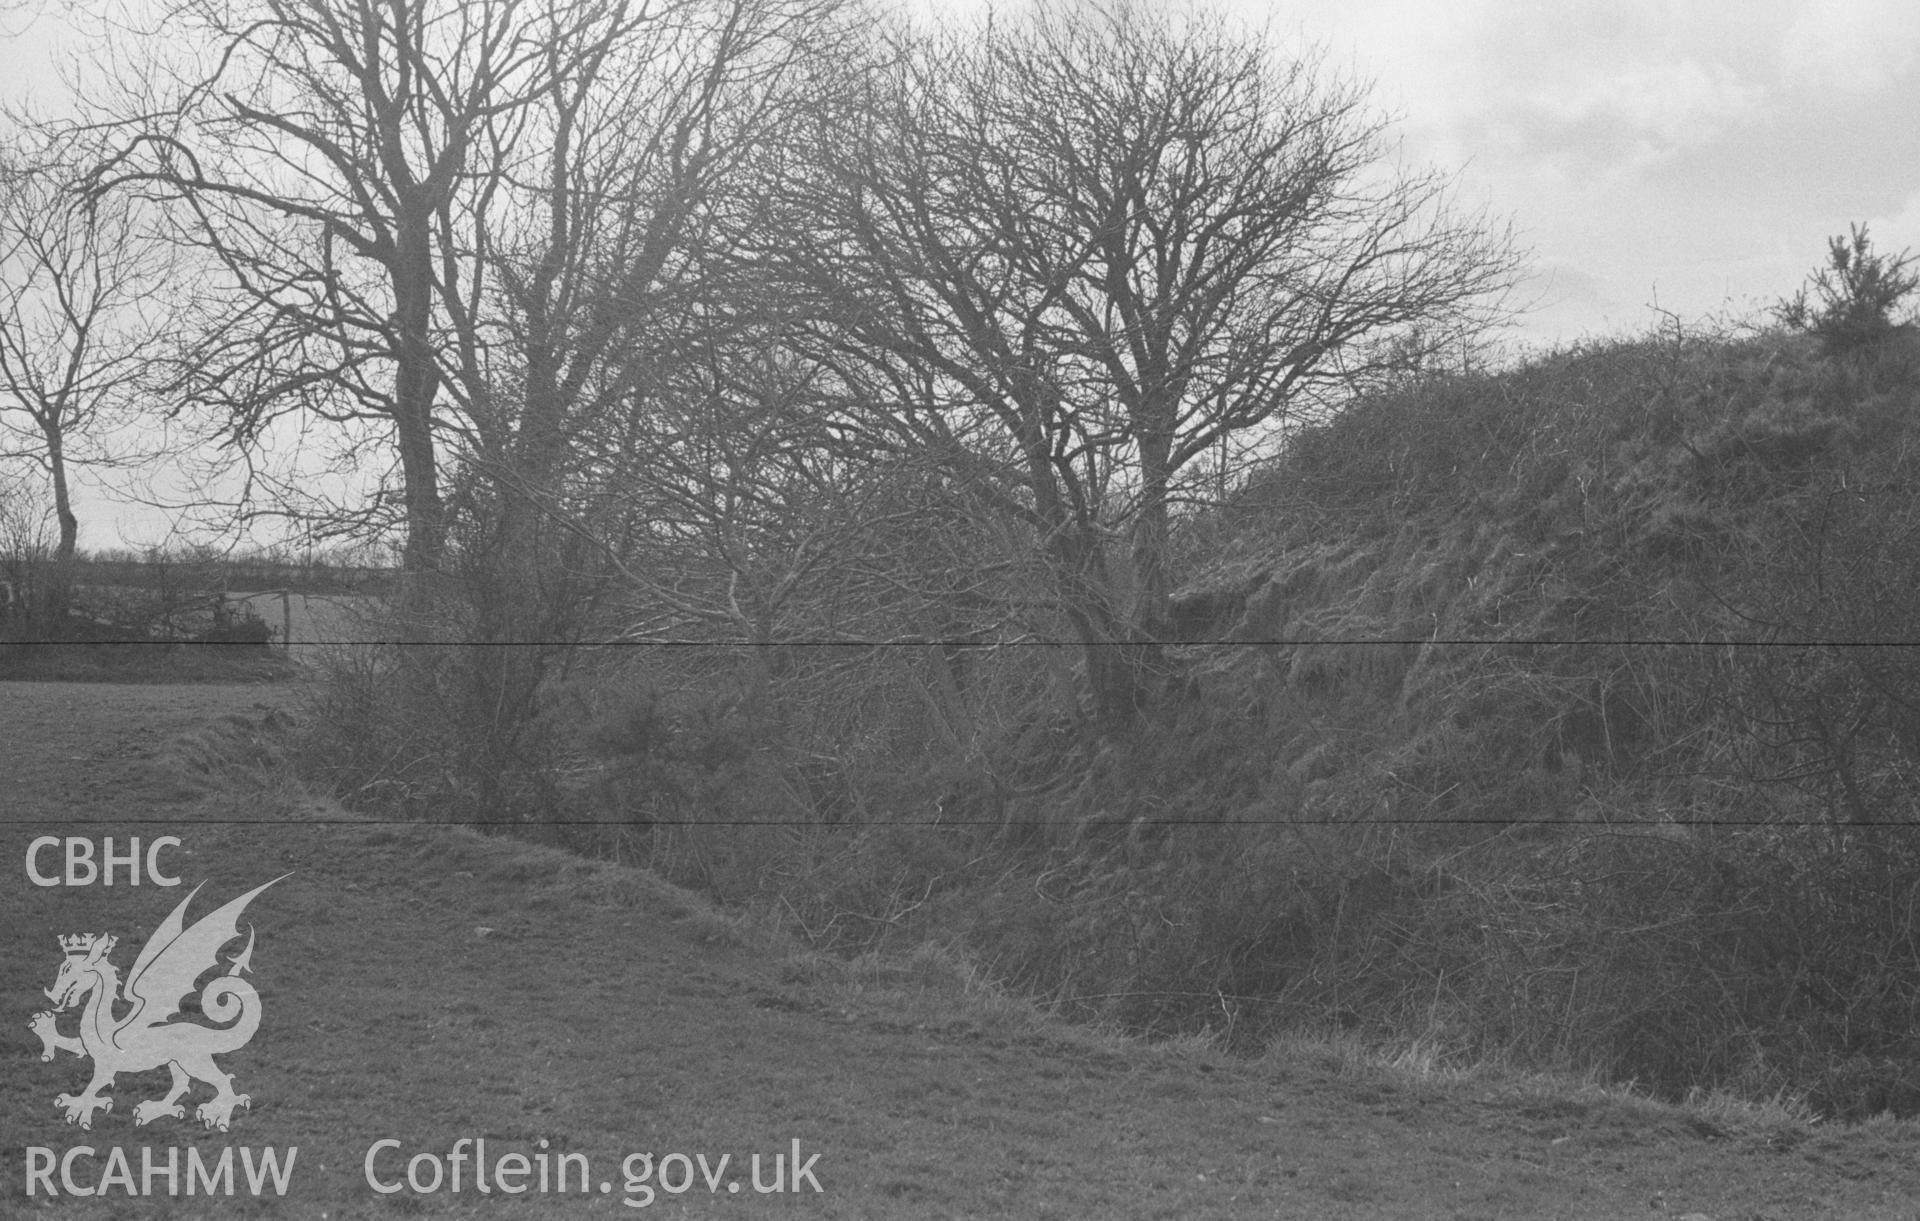 Digital copy of black & white negative showing southern side of the Norman motte 100m north east of site of St Mary's church, Llanfair Trefhelygen. Photographed in April 1963 by Arthur O. Chater from Grid Reference SN 3444 4420, looking west south west.